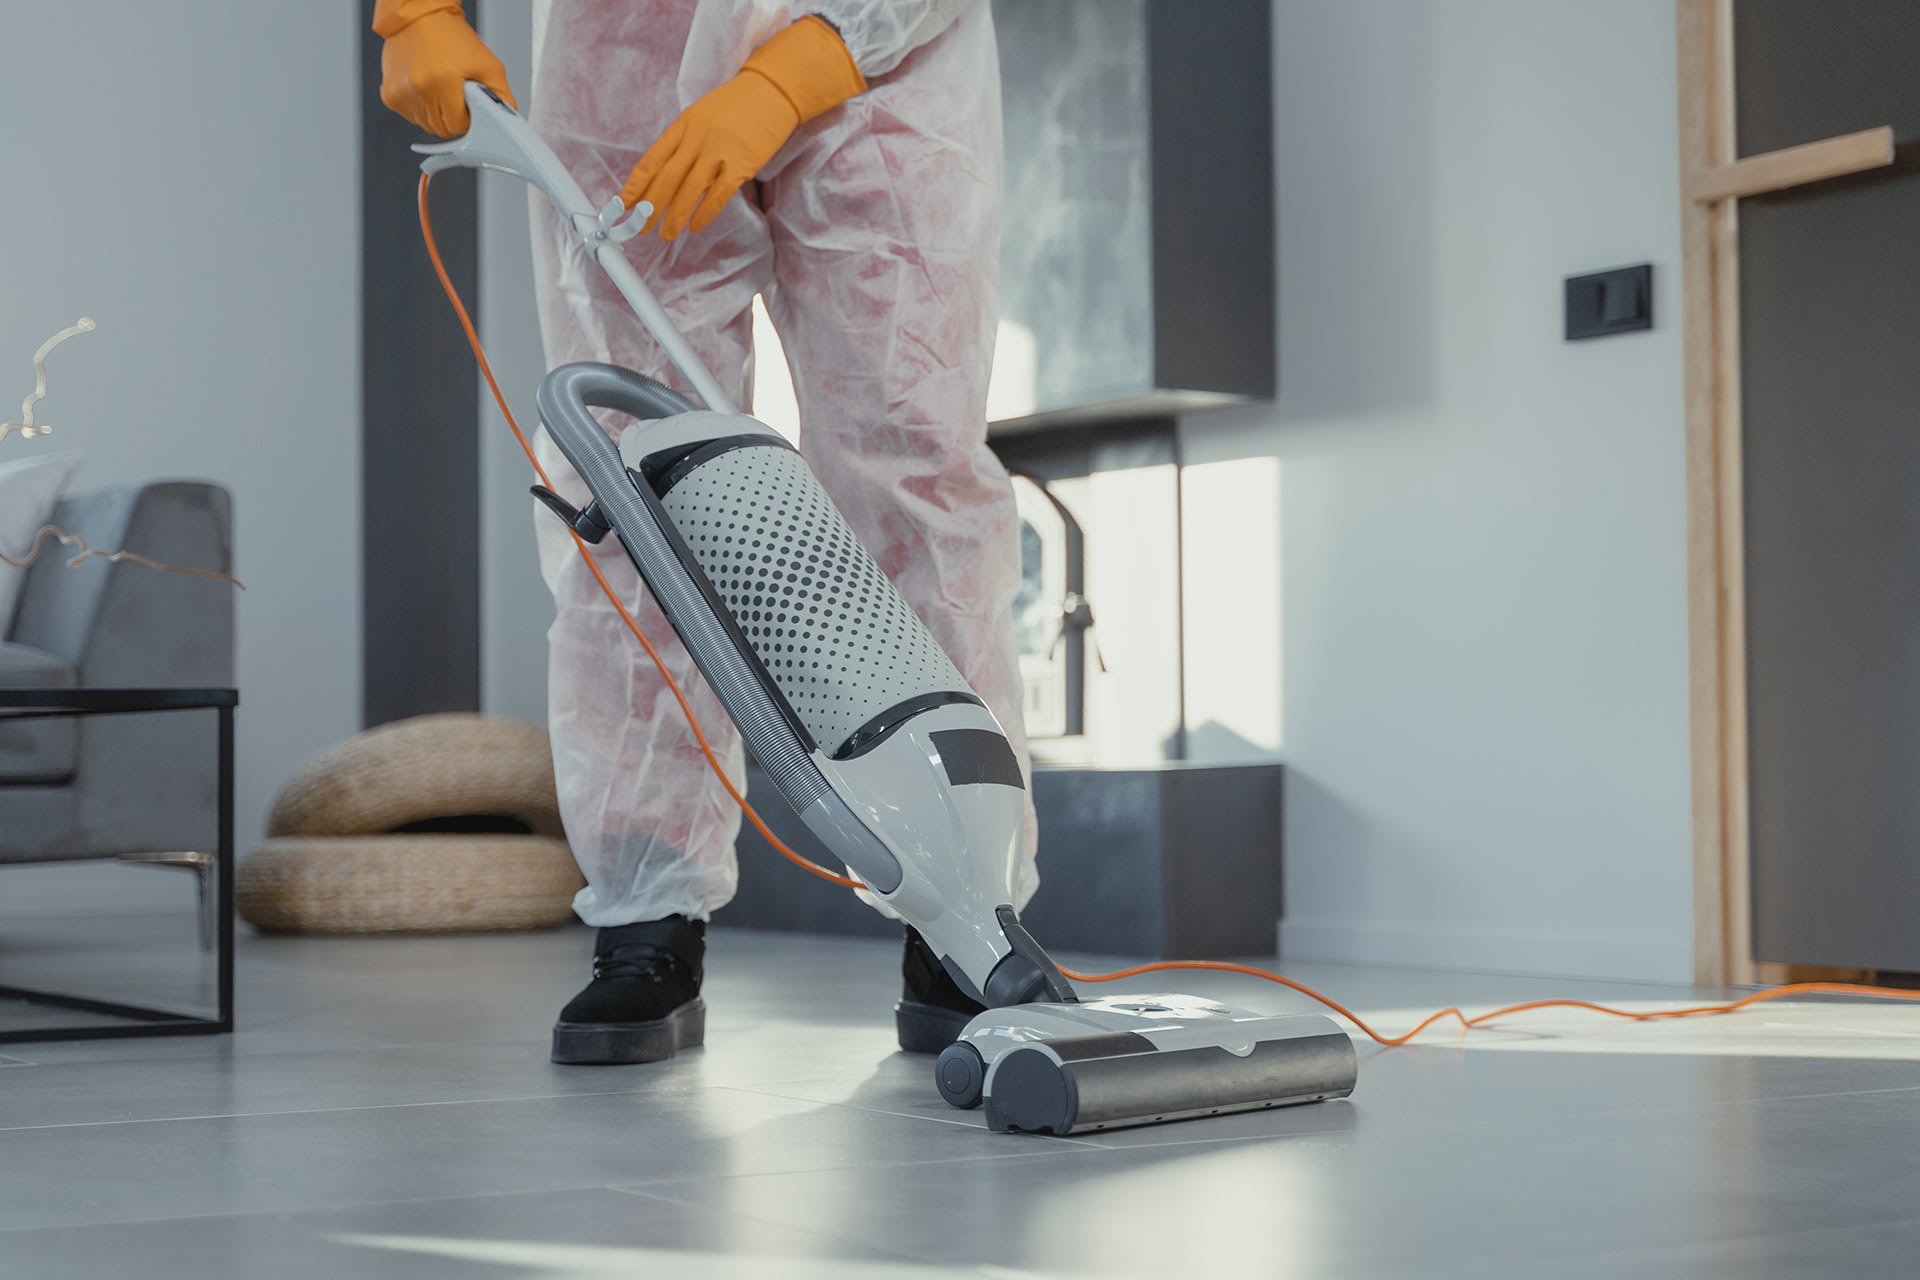 Yuma Commercial cleaning vaccuming.